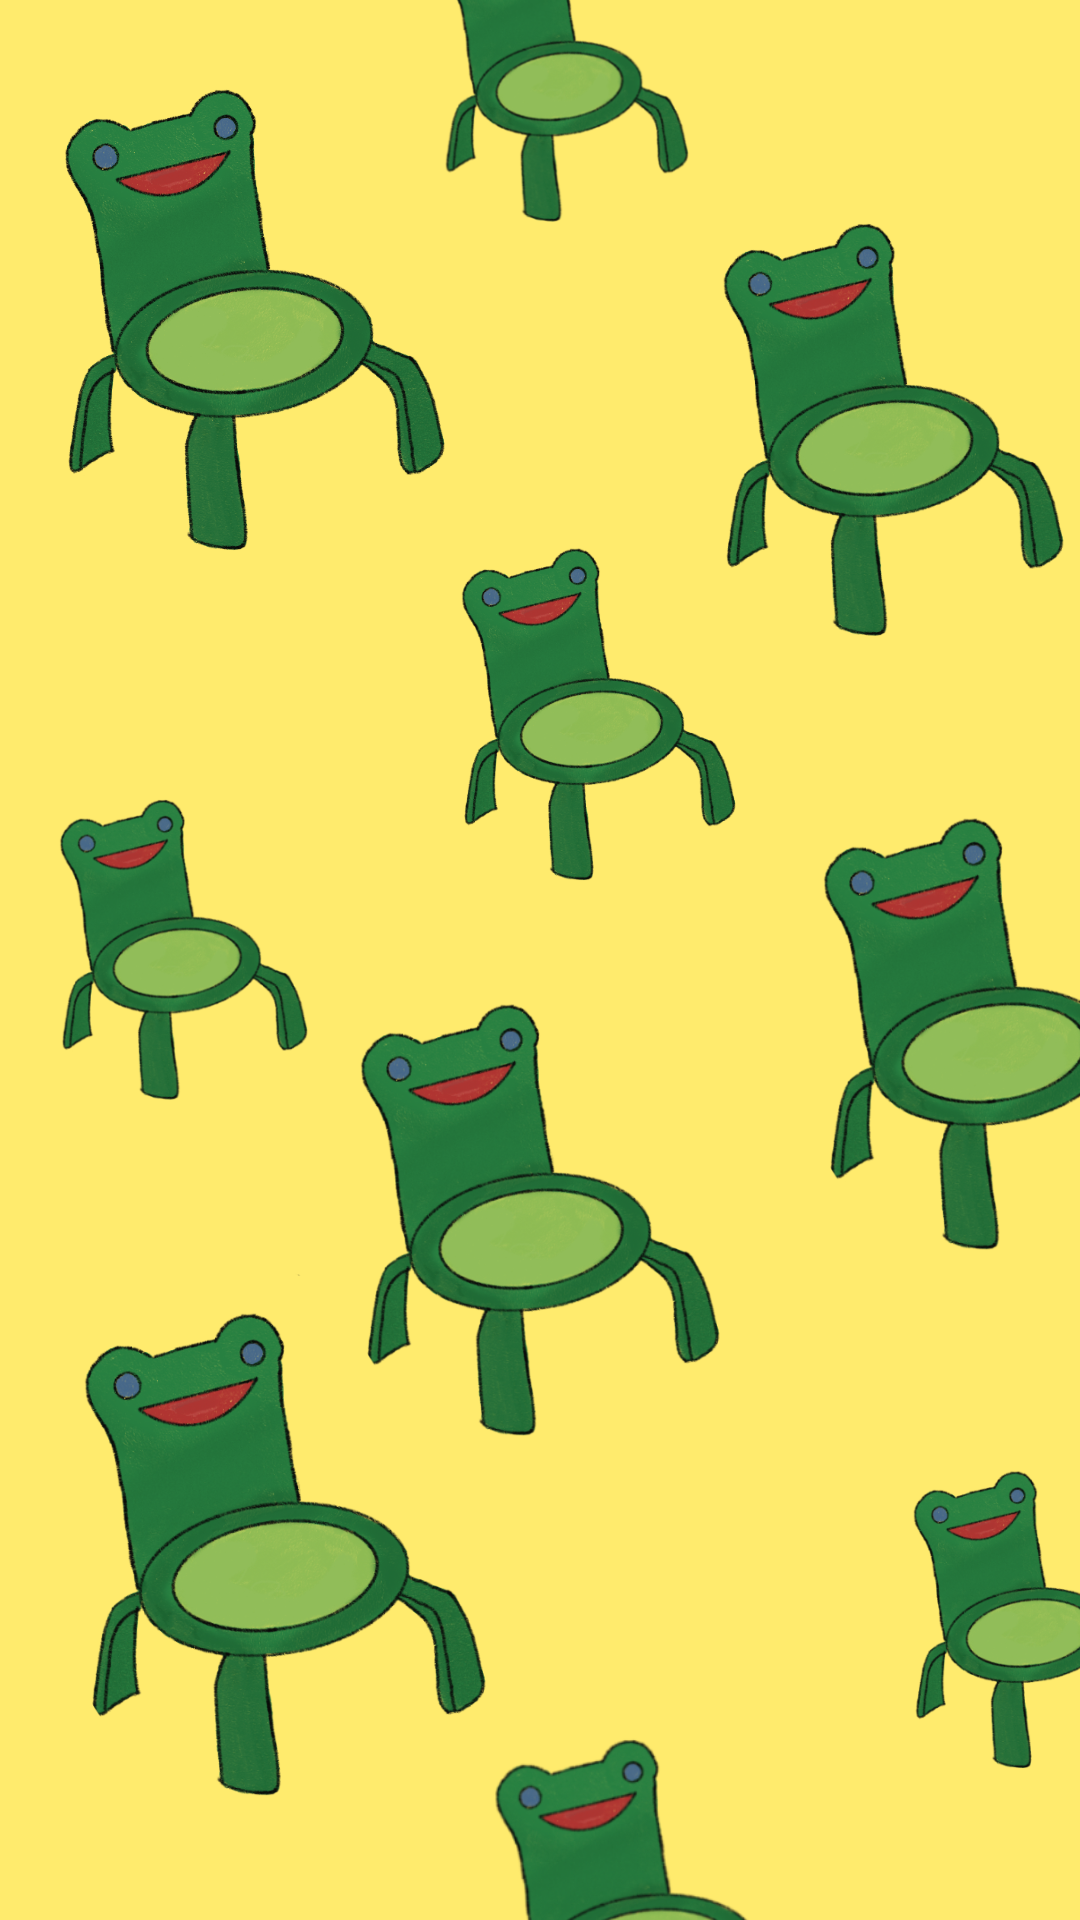 Froggy chair wallpaper. Animal crossing, Frog wallpaper, Animal crossing qr